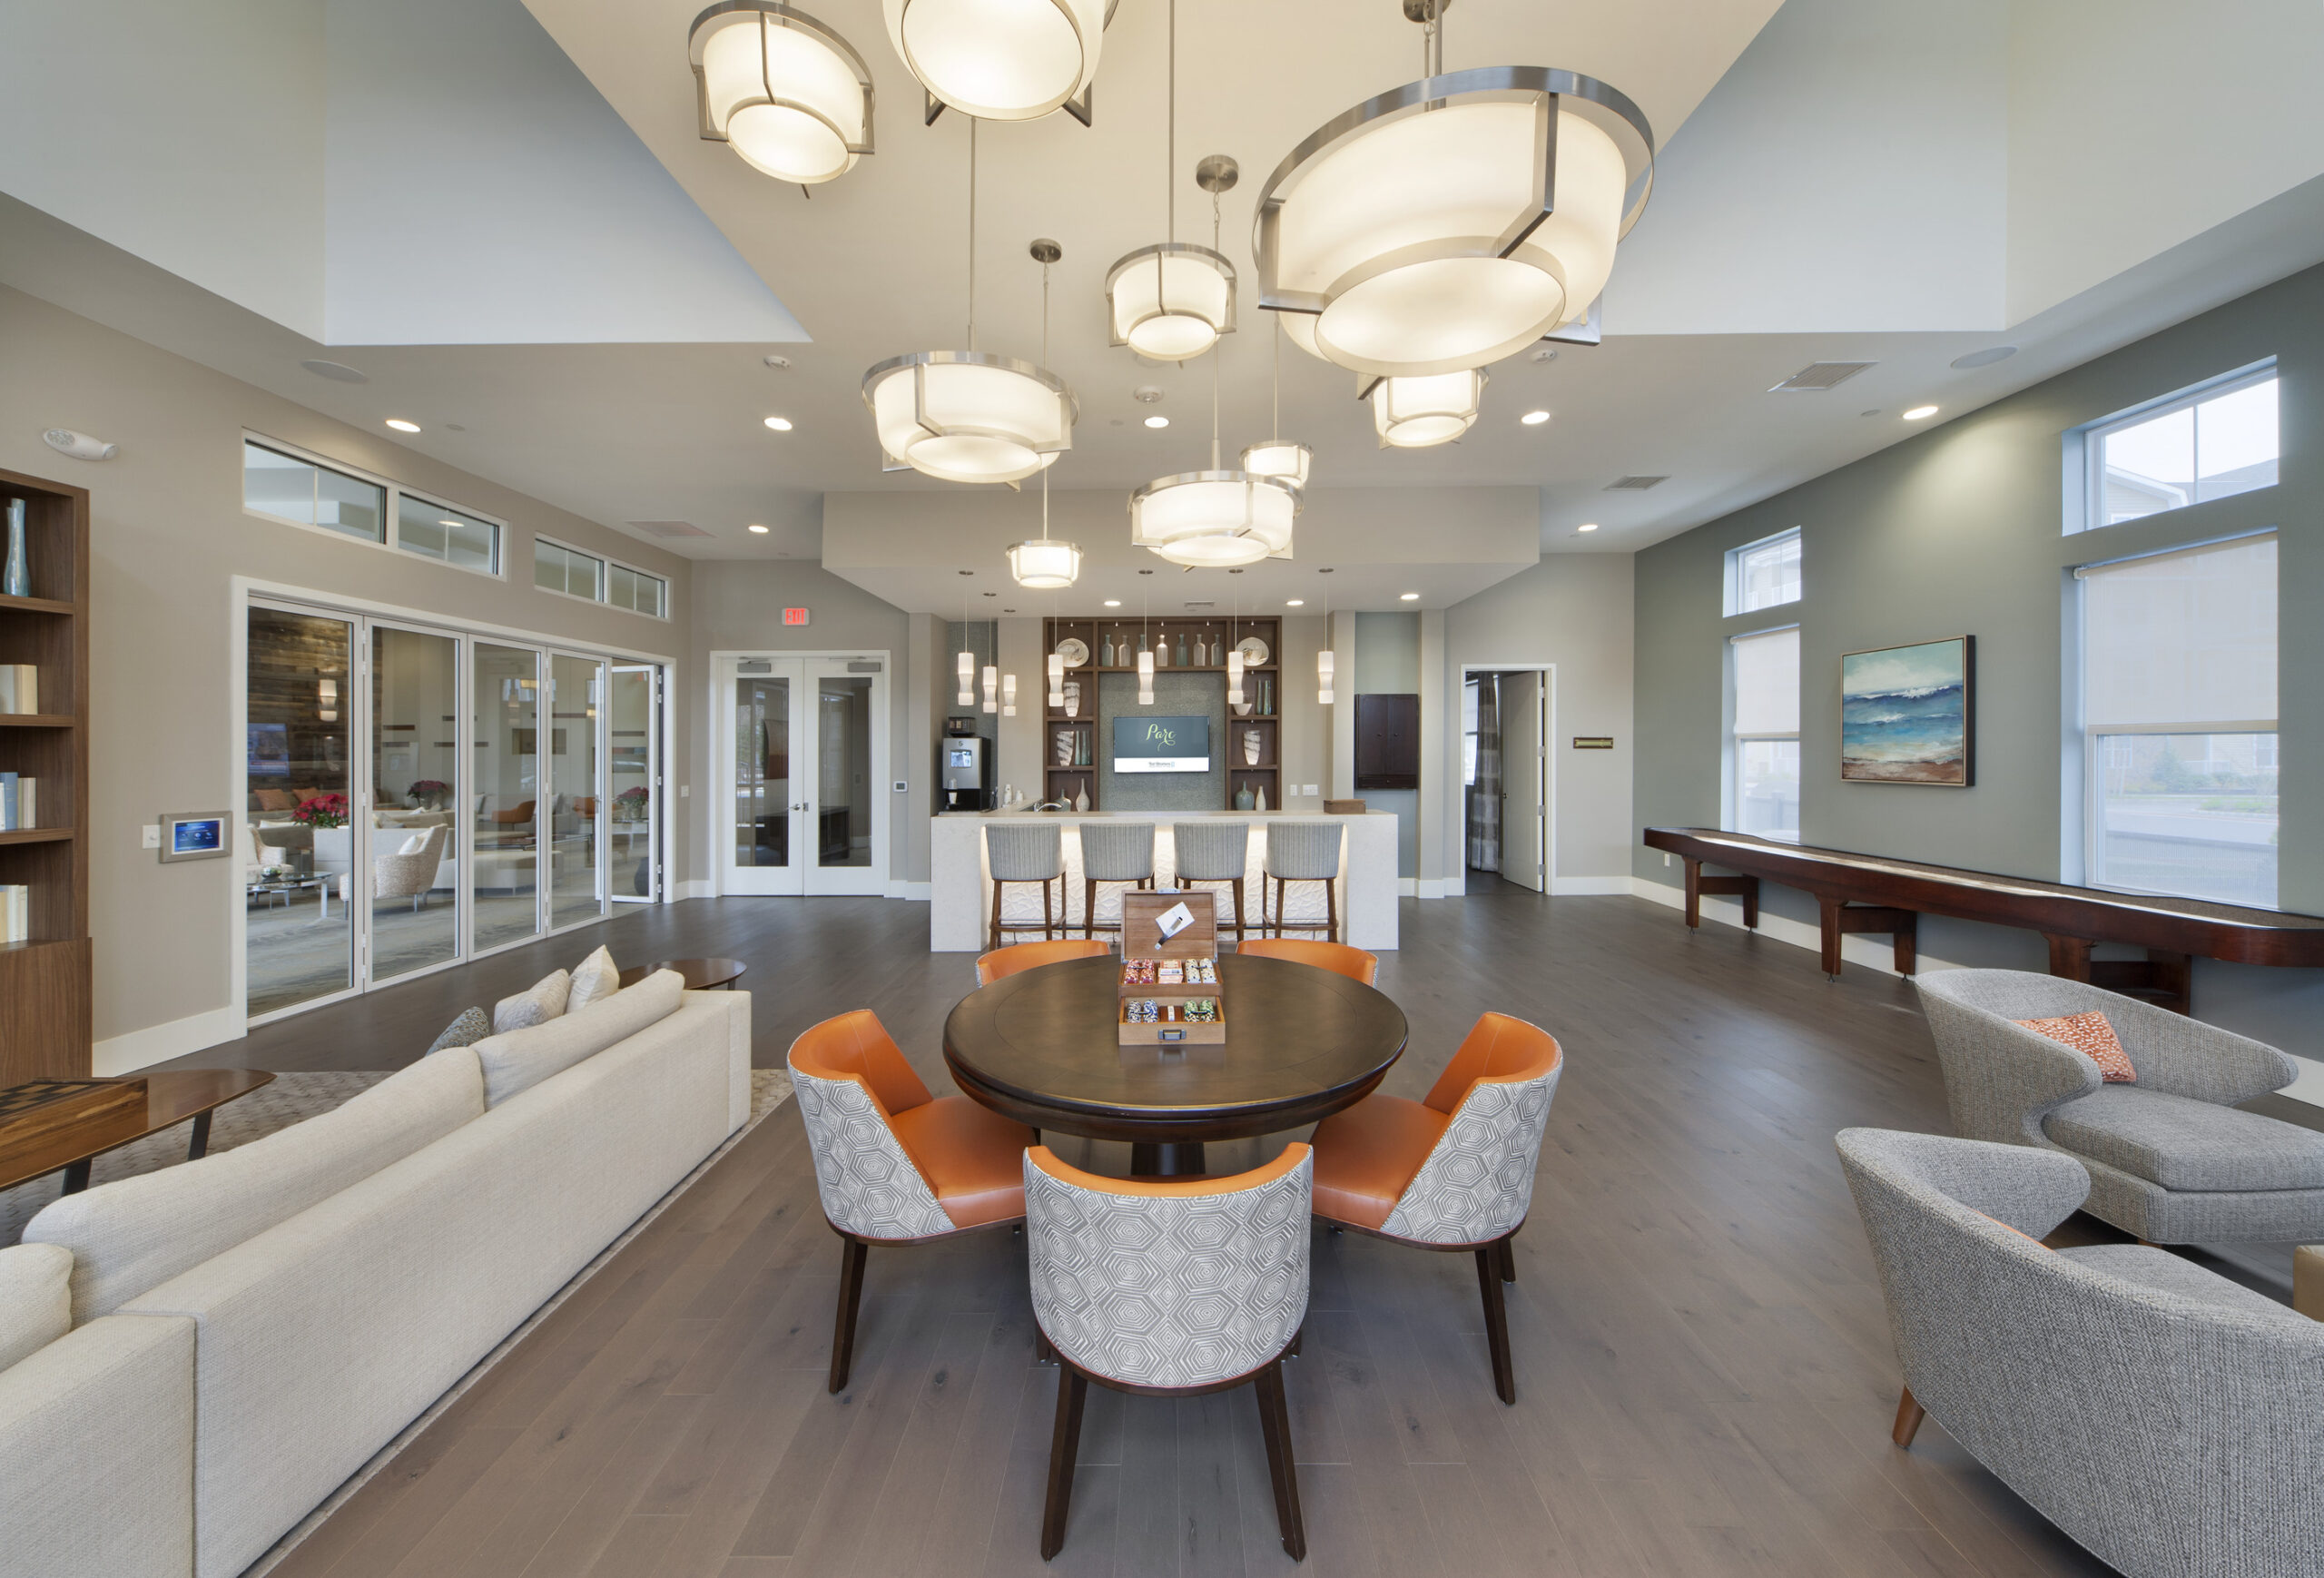 Parc Plymouth Meeting's resident lounge with couches, poker table, bar seating, and games